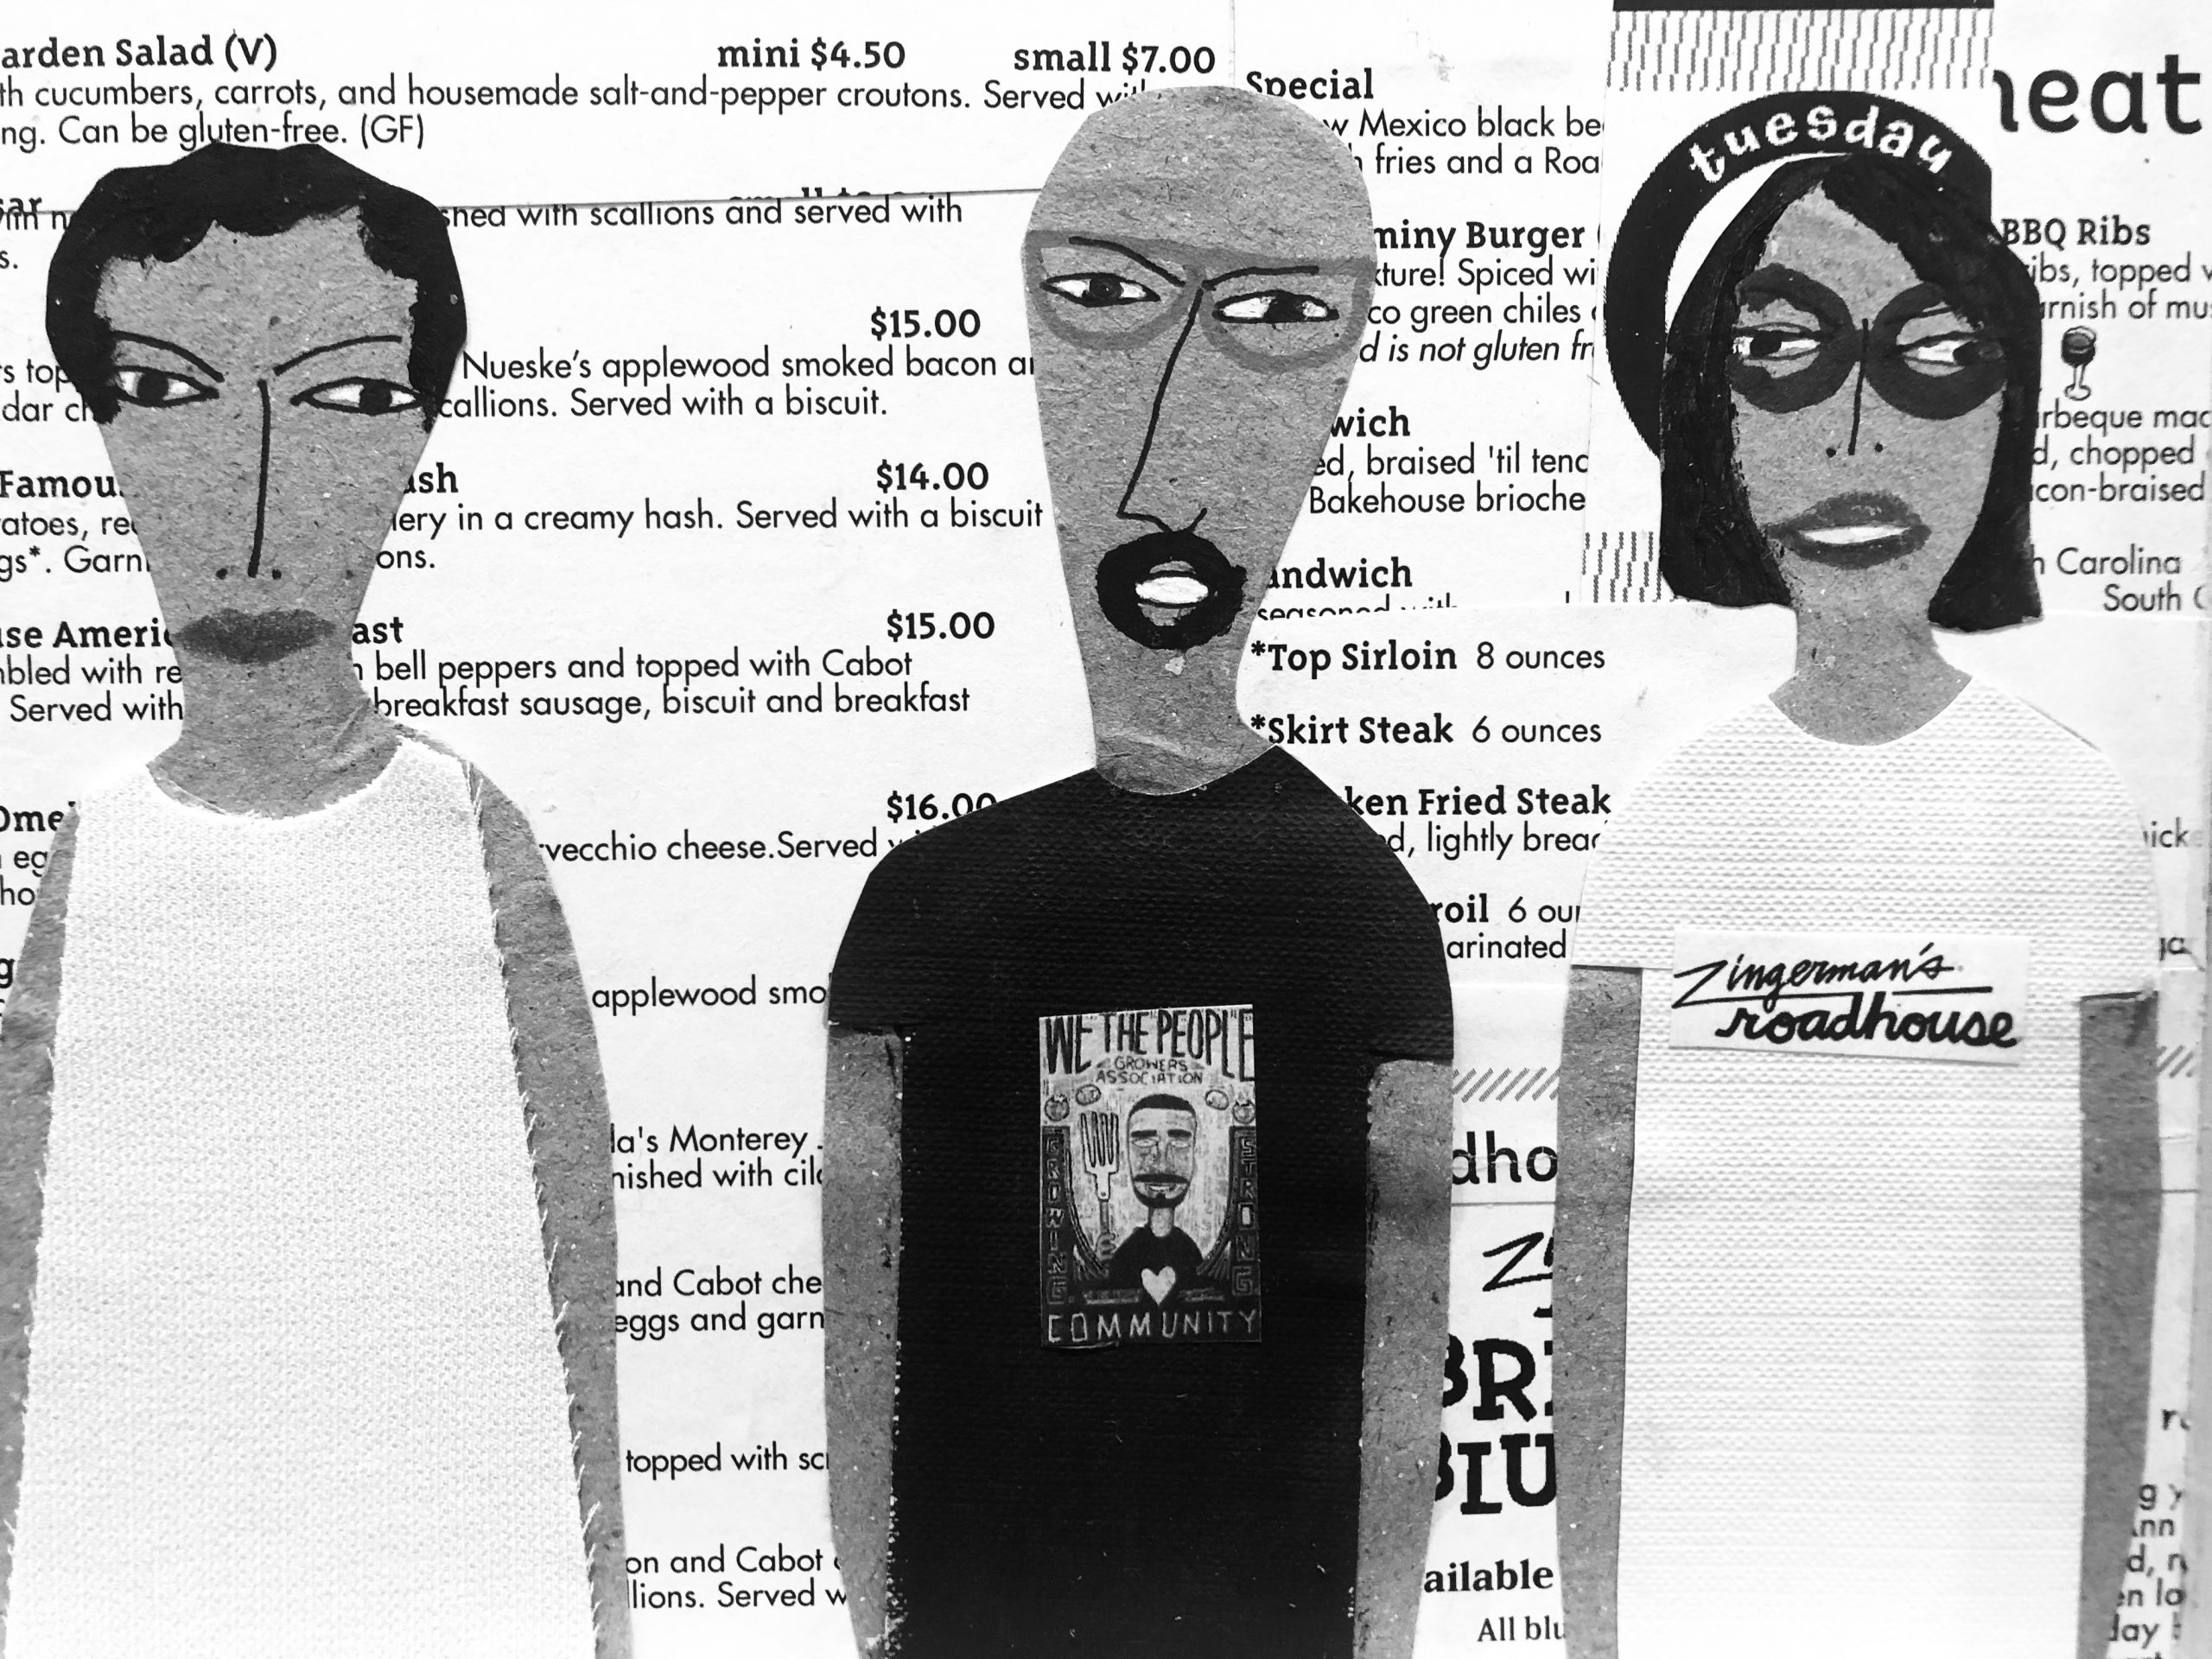 An illustration of 3 people from Zingerman's Roadhouse as depicted on a commisioned peice by artist Patrick-Earl Barnes.